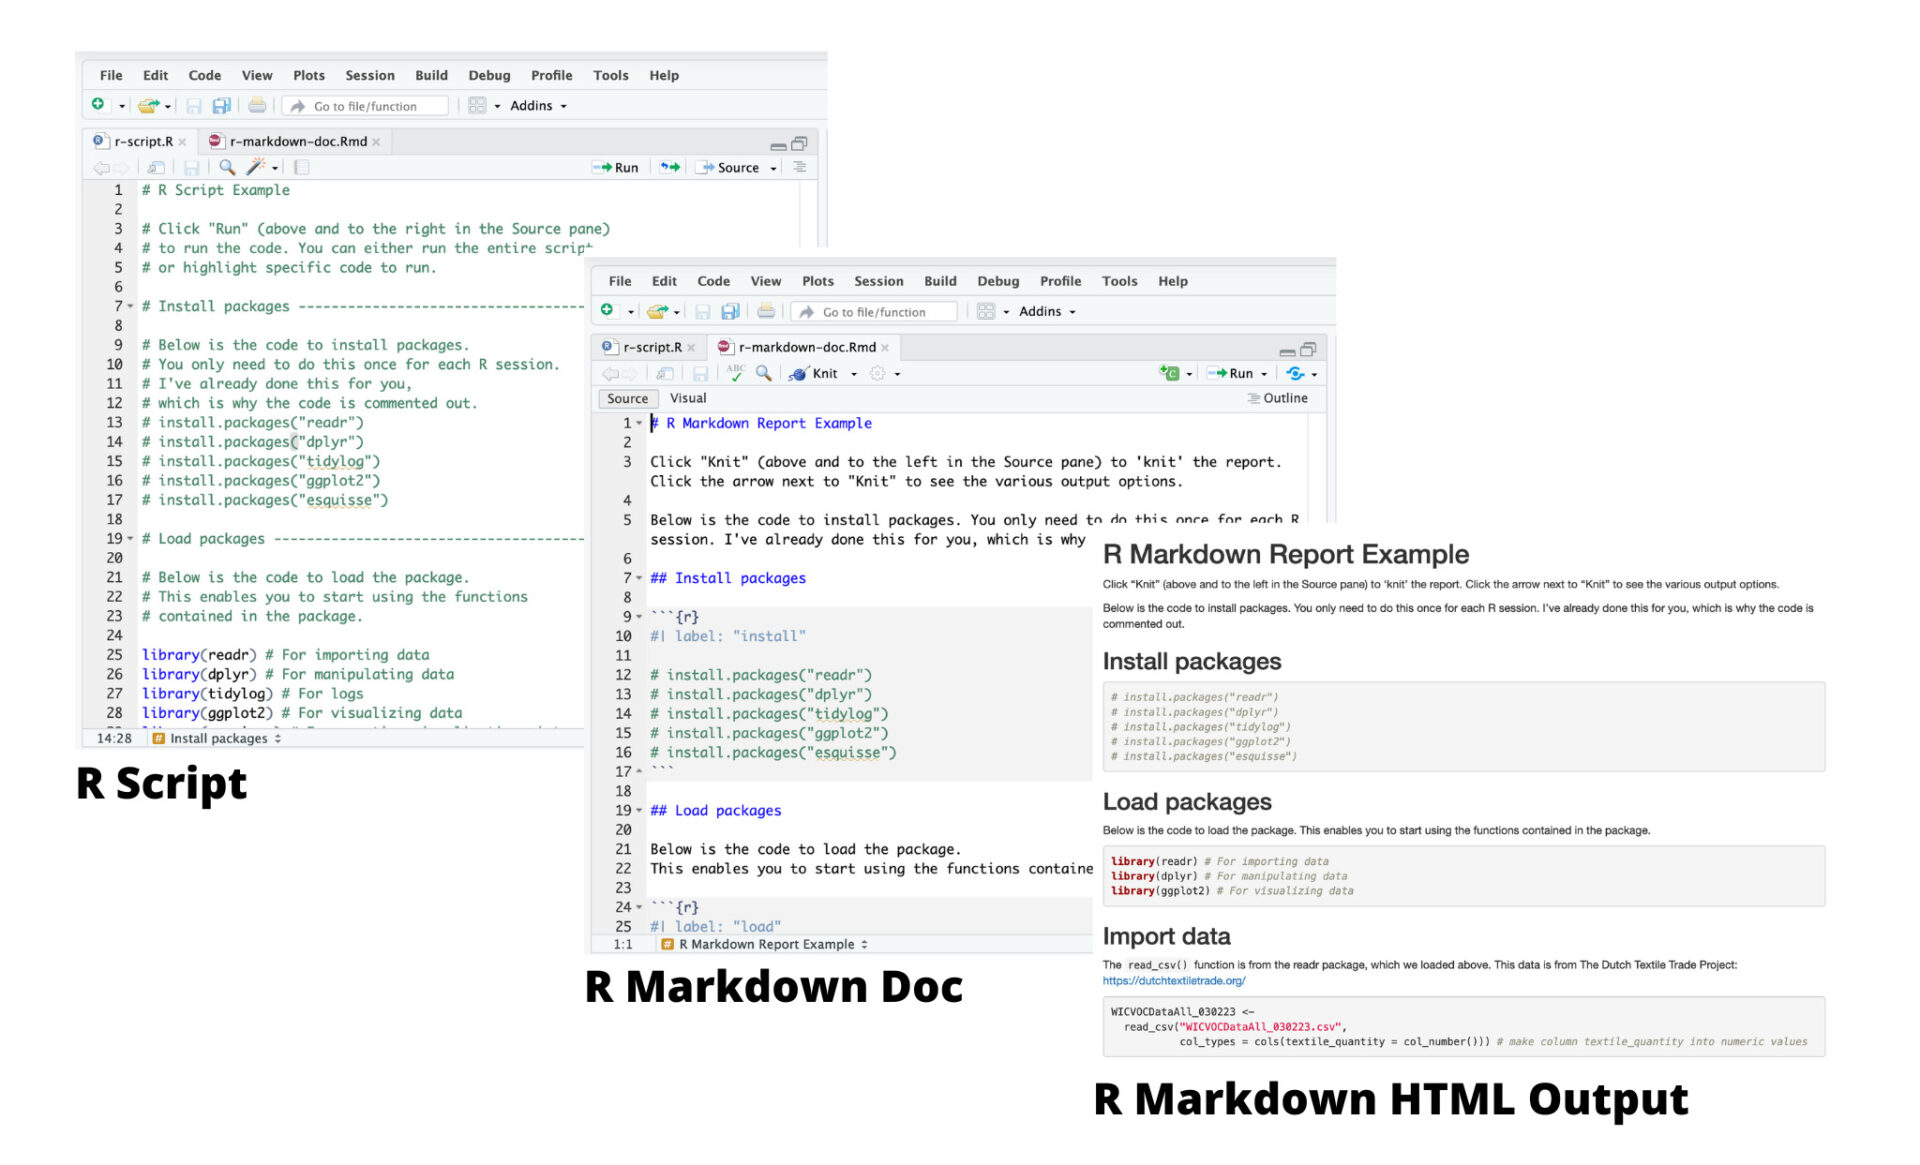 An R script, an R Markdown document, and a rendered R Markdown in HTML.